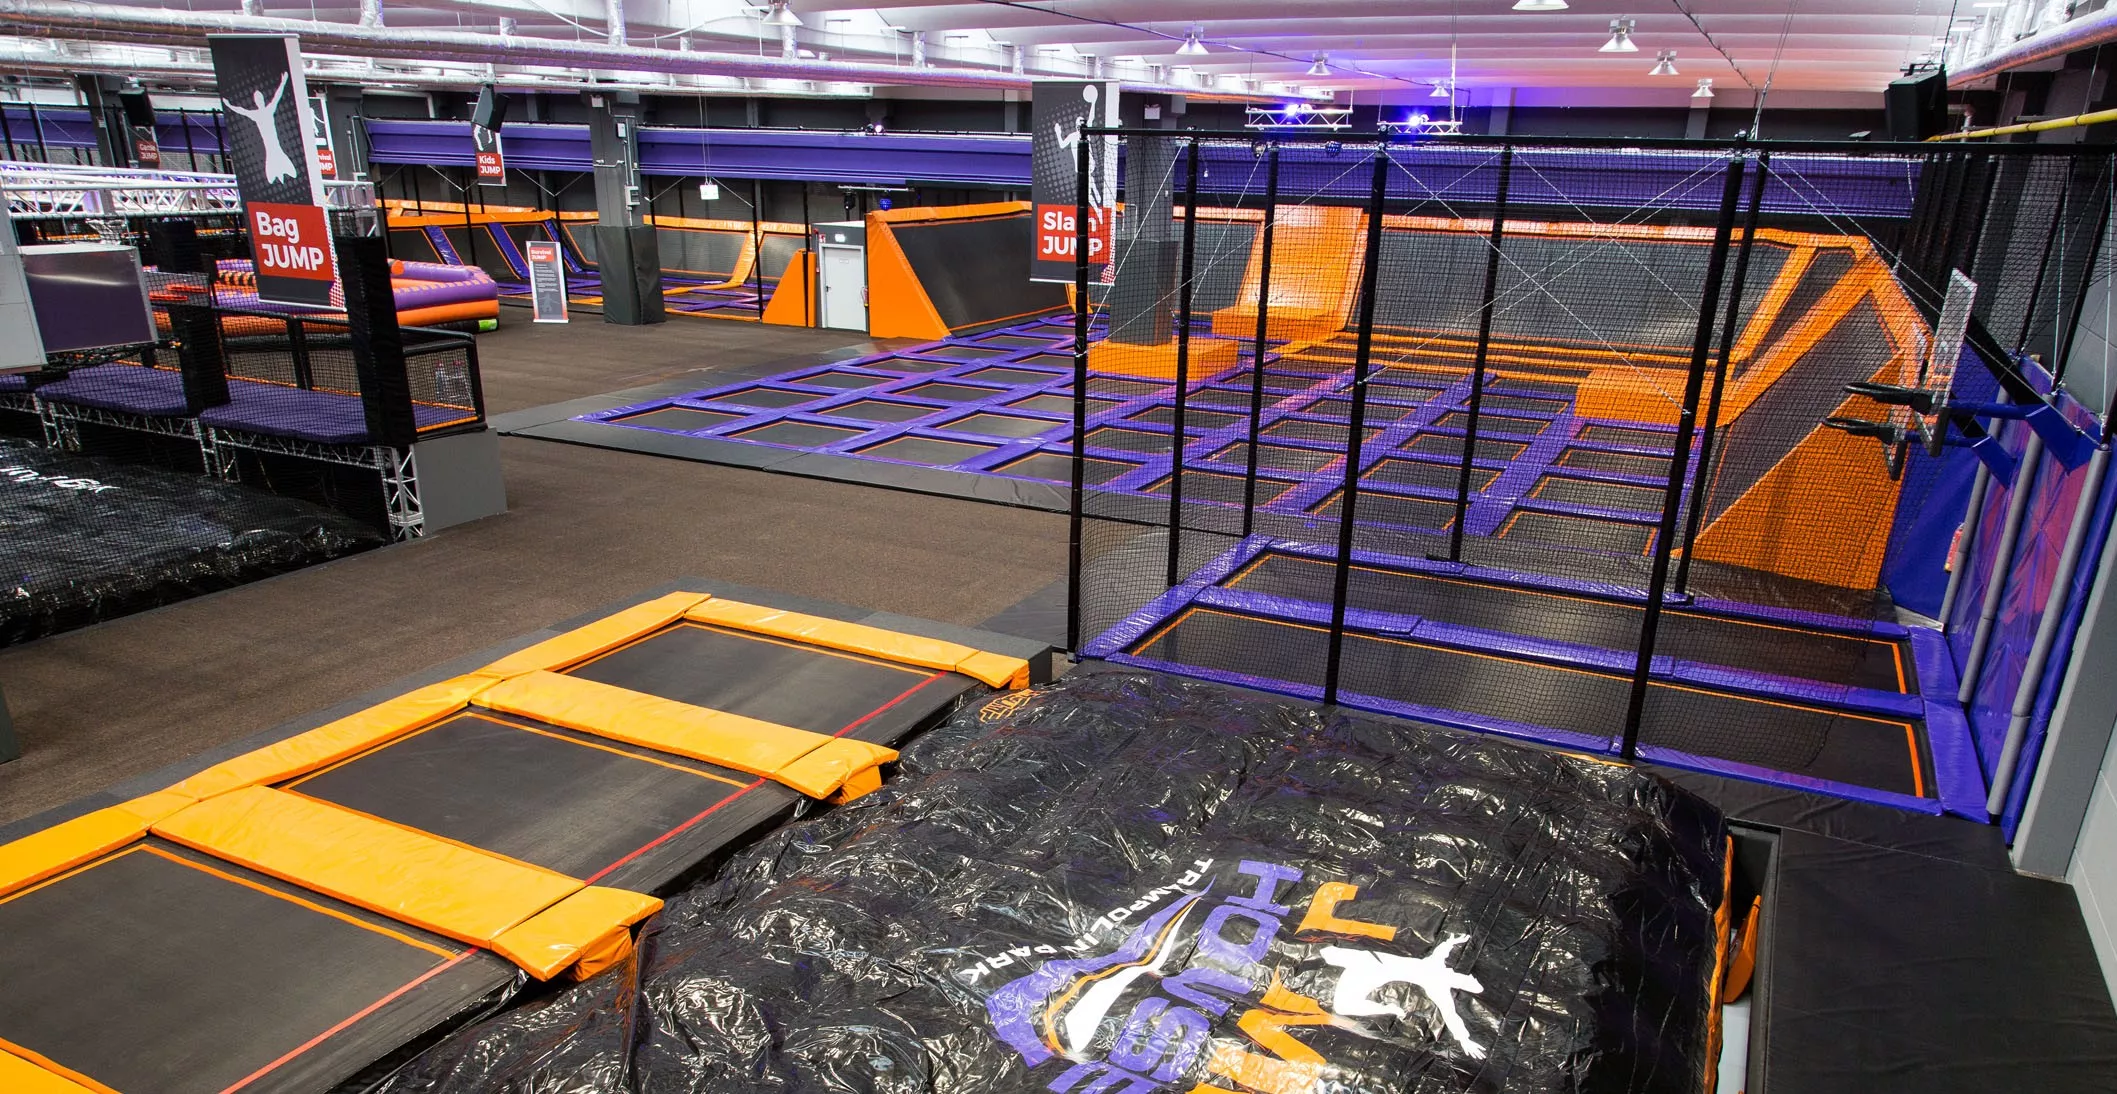 JUMP House Cologne in Germany, Europe | Trampolining - Rated 6.3